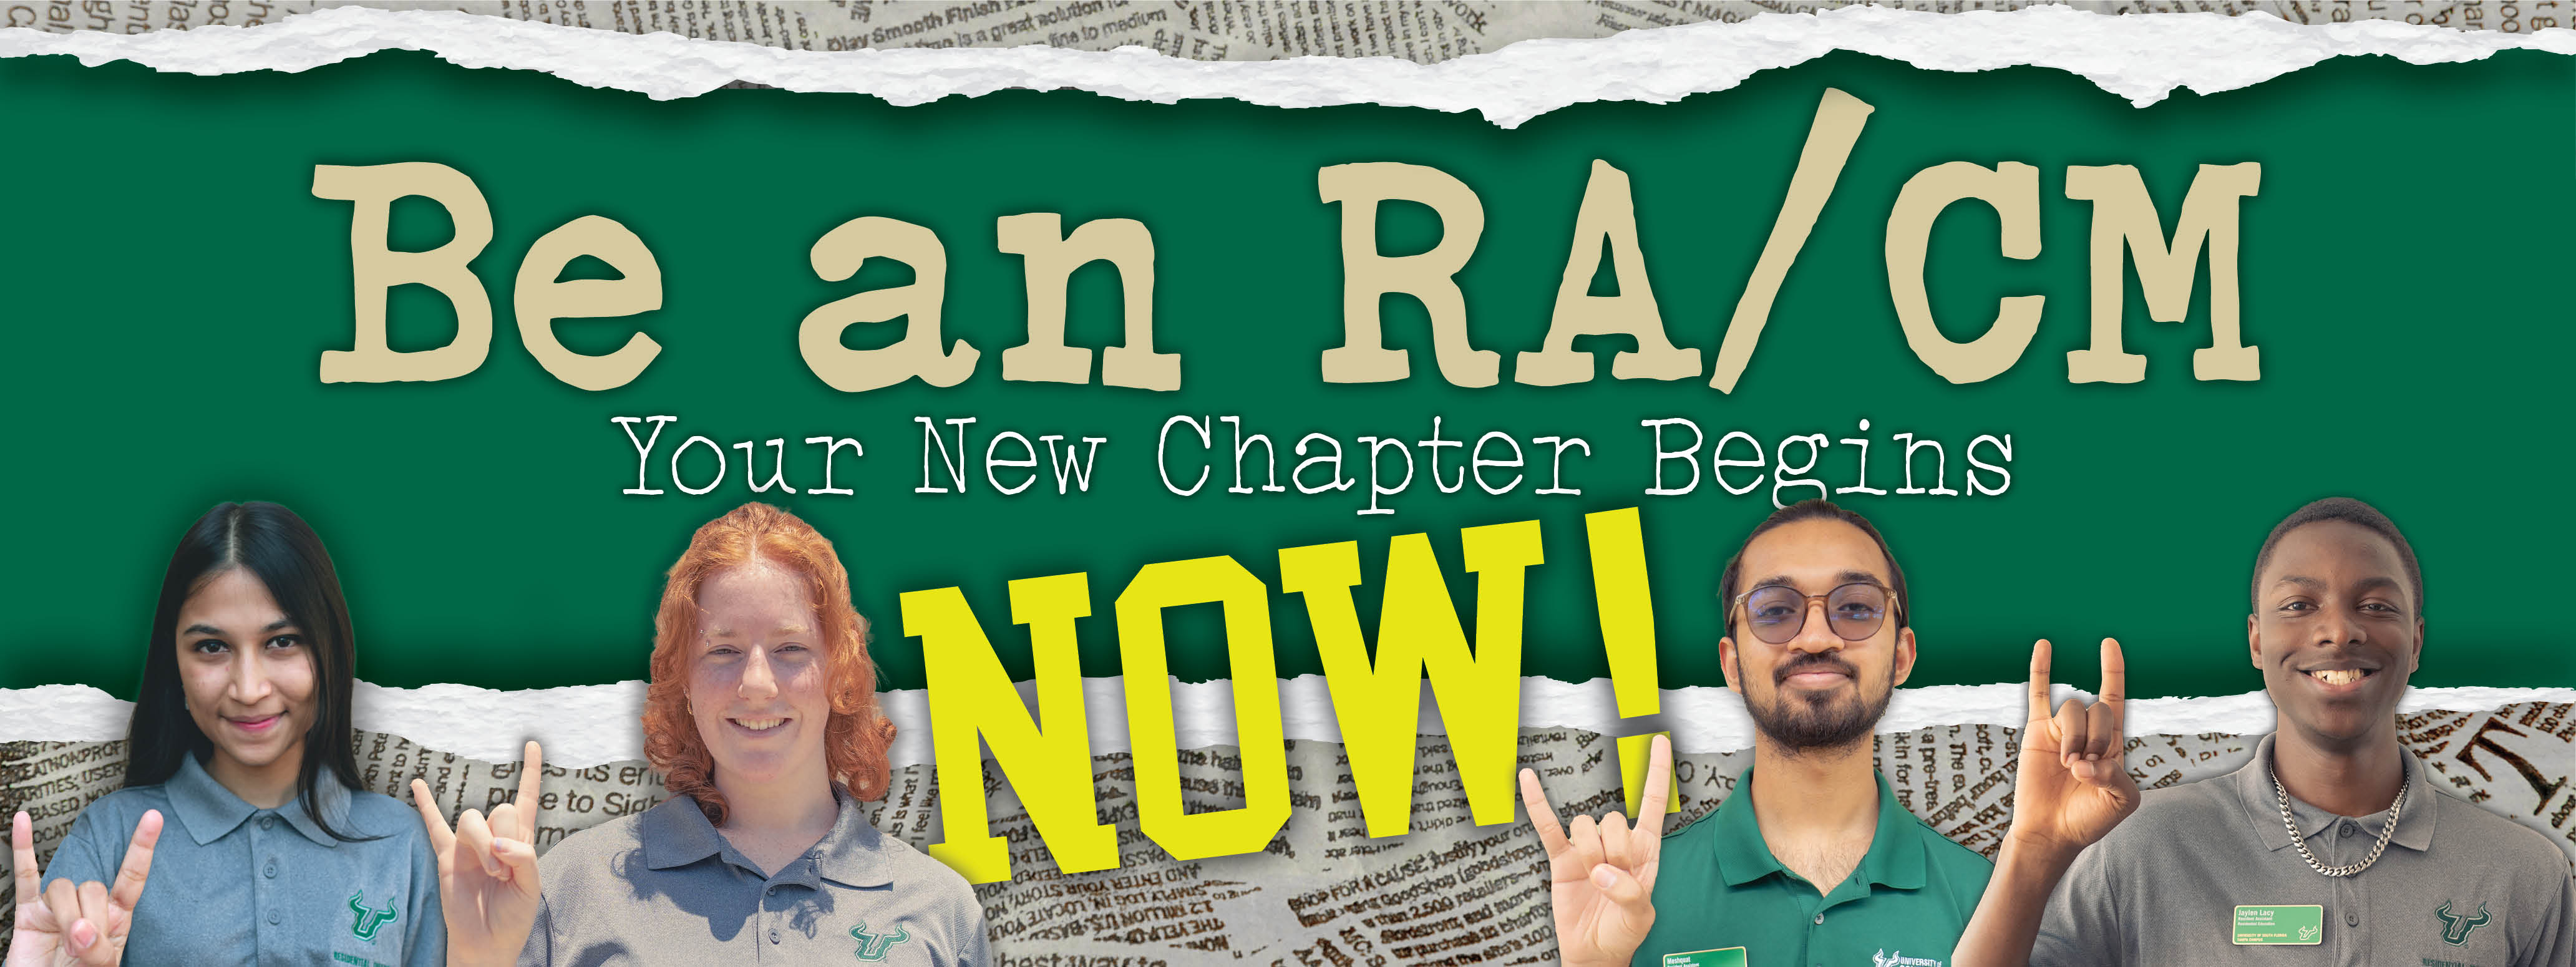 Be an RA/CM. Your new chapter begins NOW! 